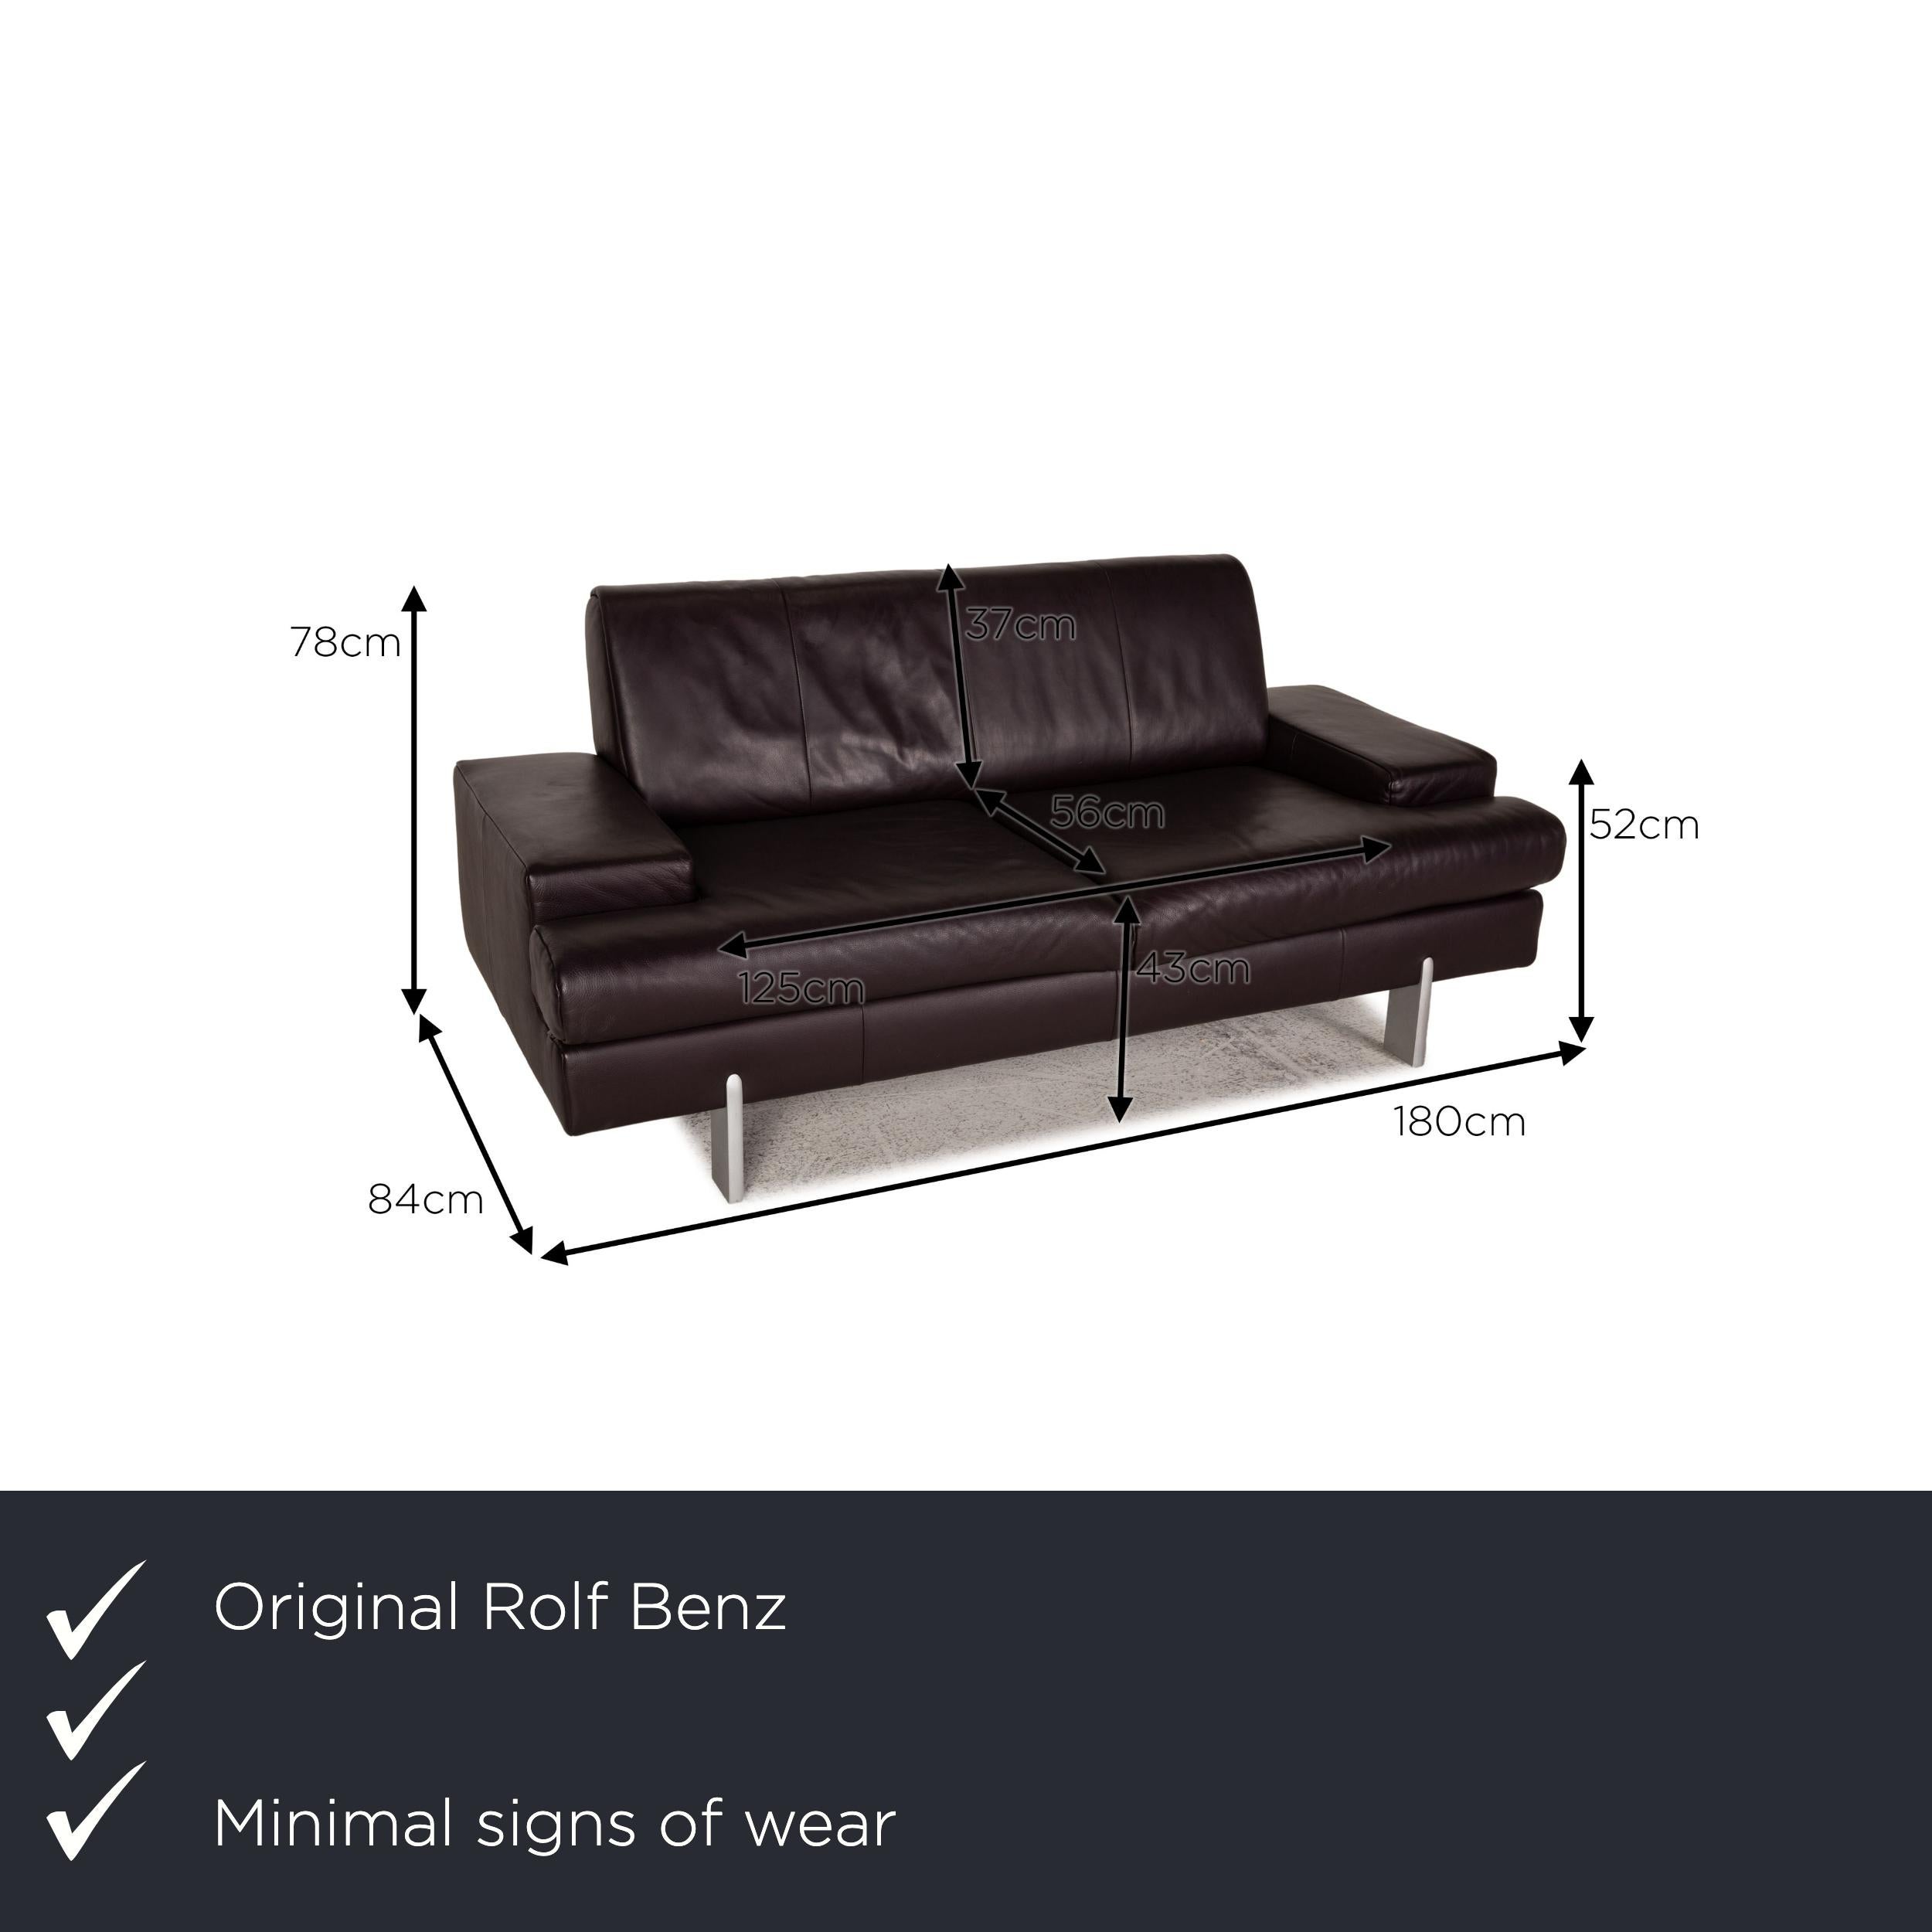 We present to you a Rolf Benz AK 644 leather sofa aubergine two-seater couch.

Product measurements in centimeters:

depth: 84
width: 180
height: 78
seat height: 43
rest height: 52
seat depth: 56
seat width: 125
back height: 37.

 